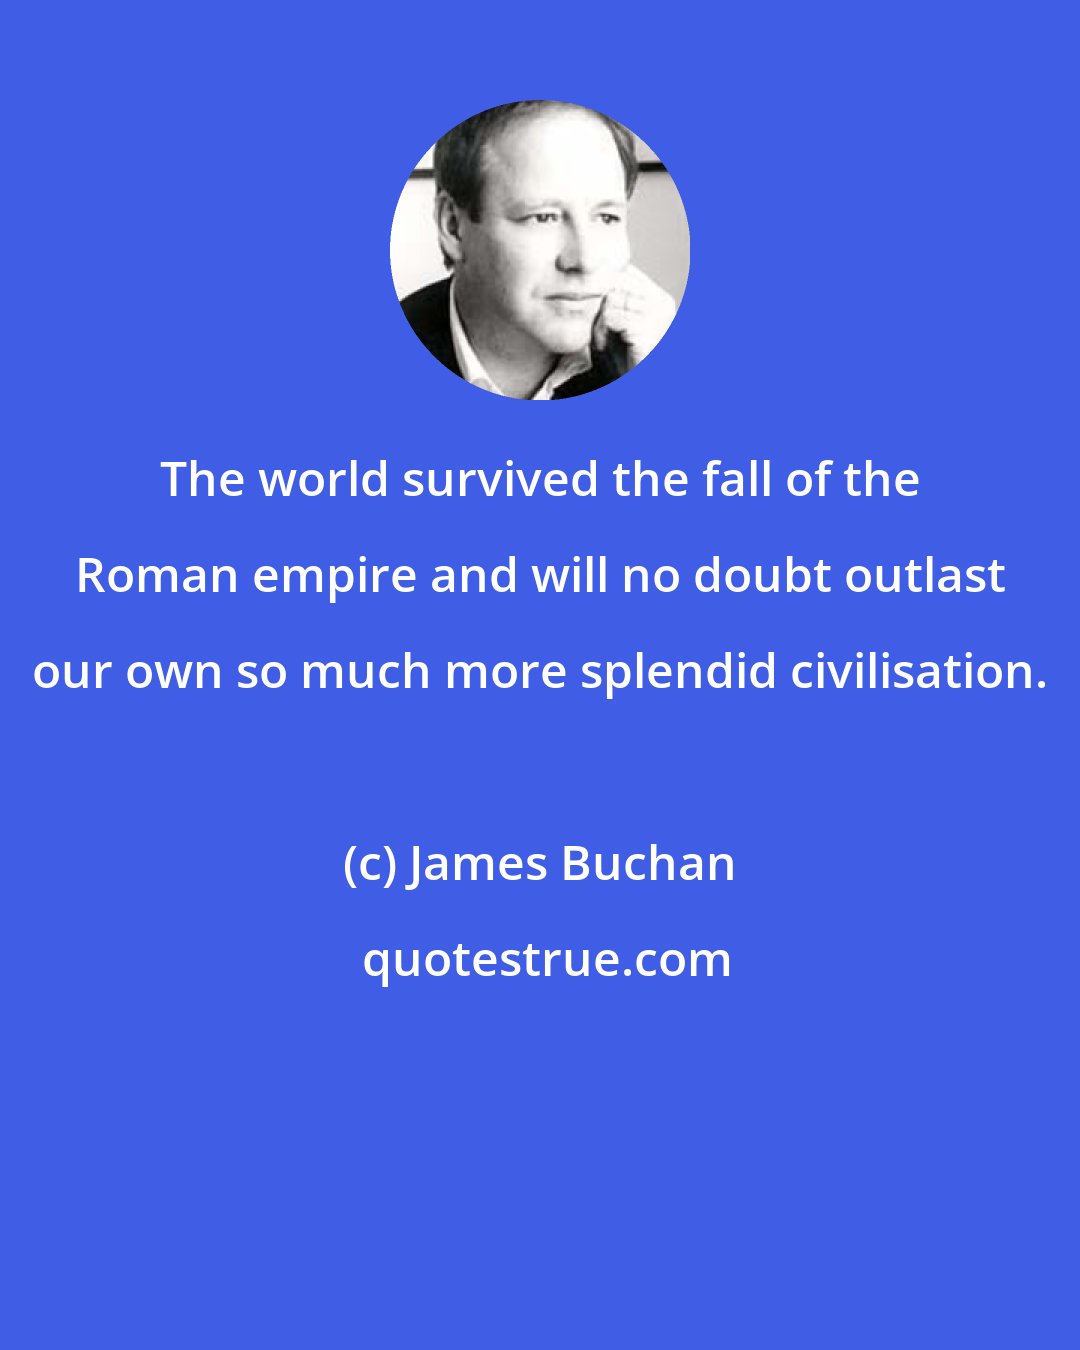 James Buchan: The world survived the fall of the Roman empire and will no doubt outlast our own so much more splendid civilisation.